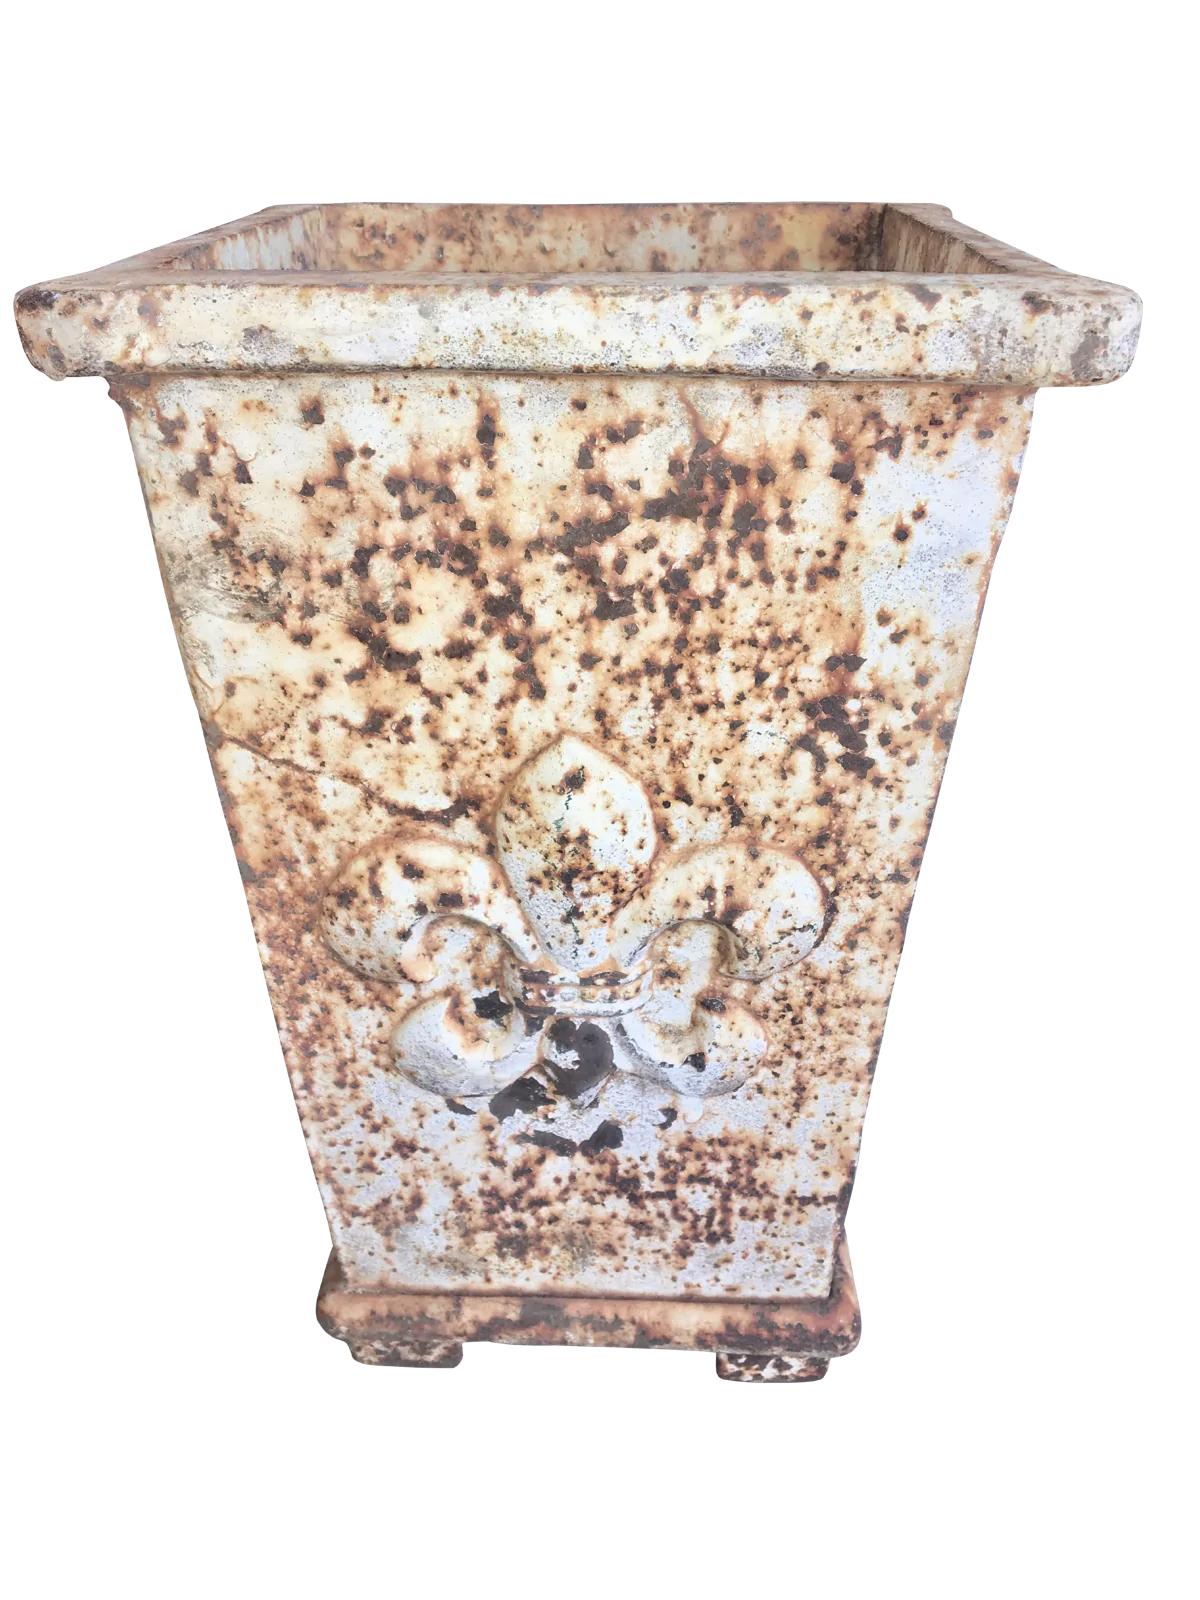 Charming 19th century French iron planter on a plinth base over four feet with worn white paint and a raised fleur-de-lis on two sides.
   